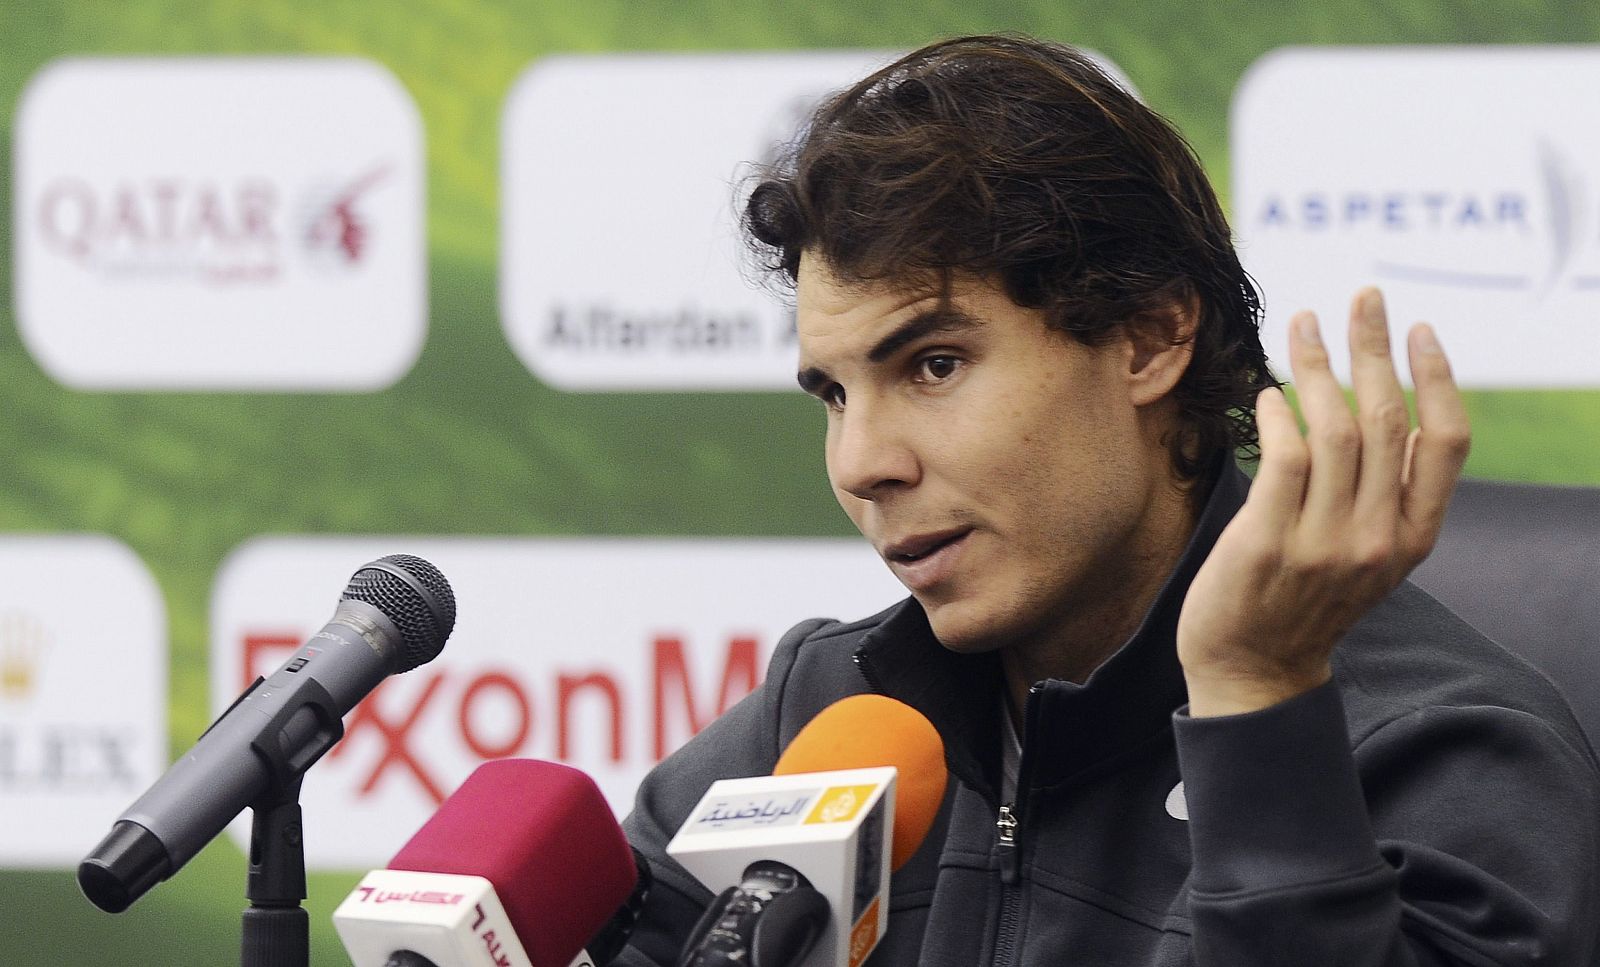 Spain's Rafael Nadal attends a news conference at the ATP Qatar Open tennis tournament in Doha